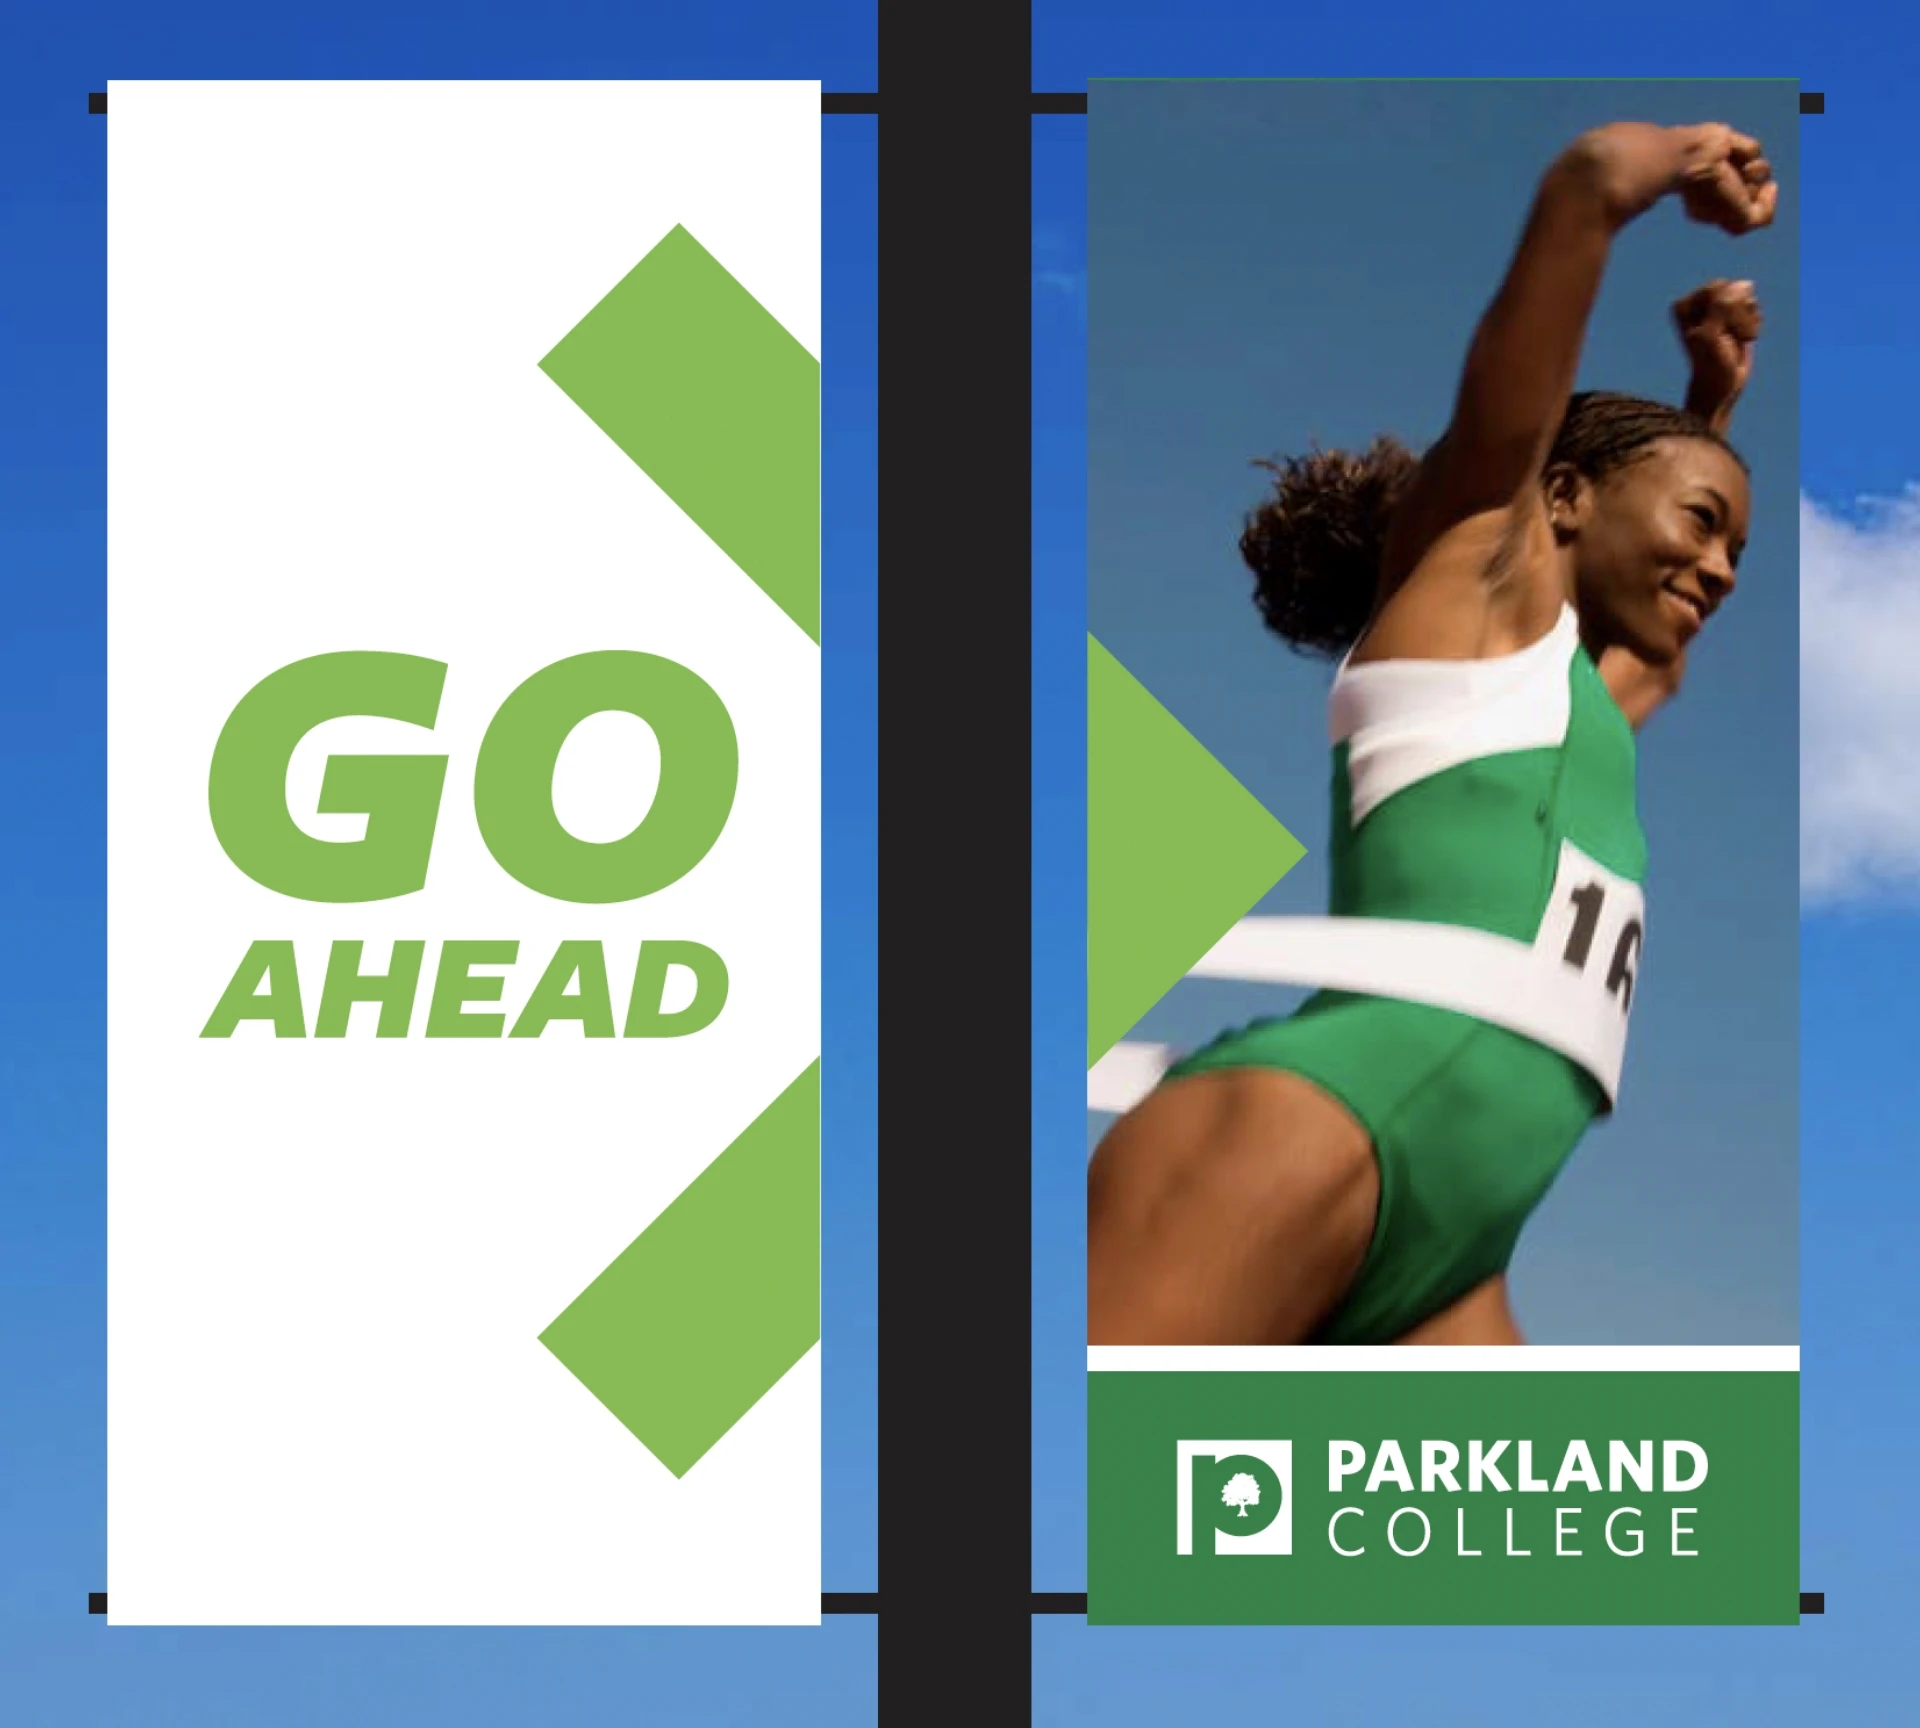 Parkland college banners.